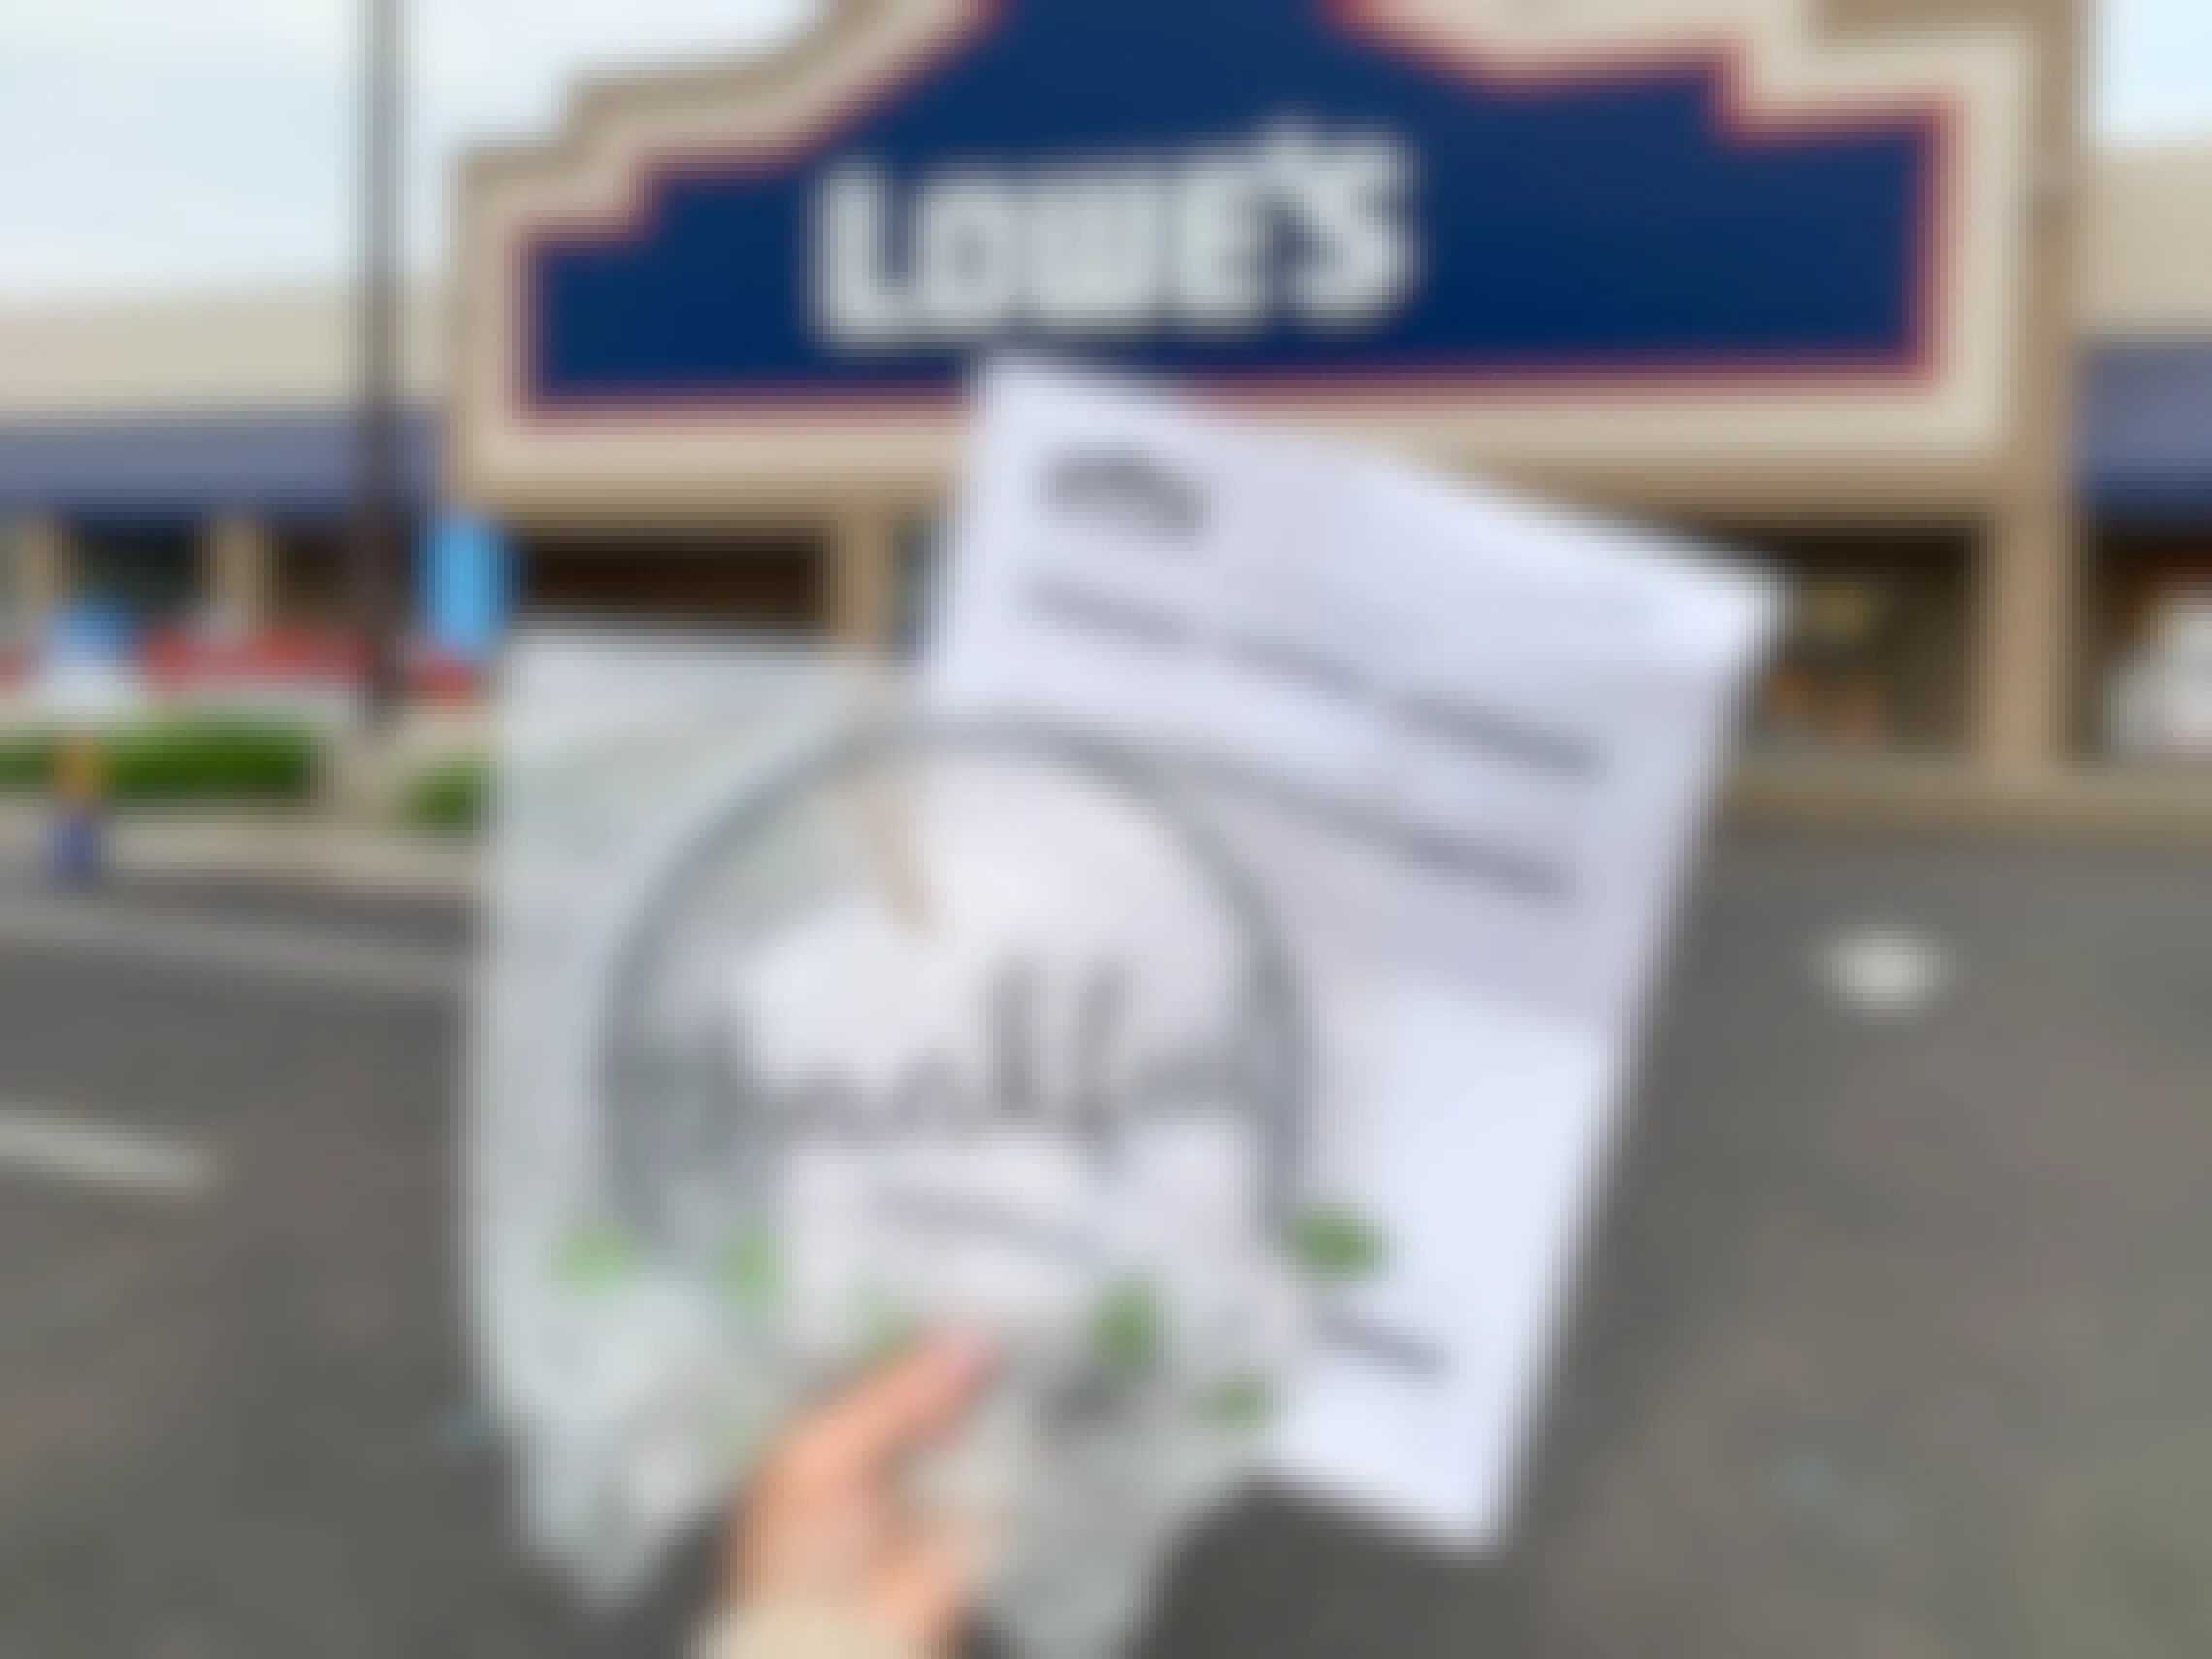 A Lowes return receipt and a thankful sign held in front of Lowes